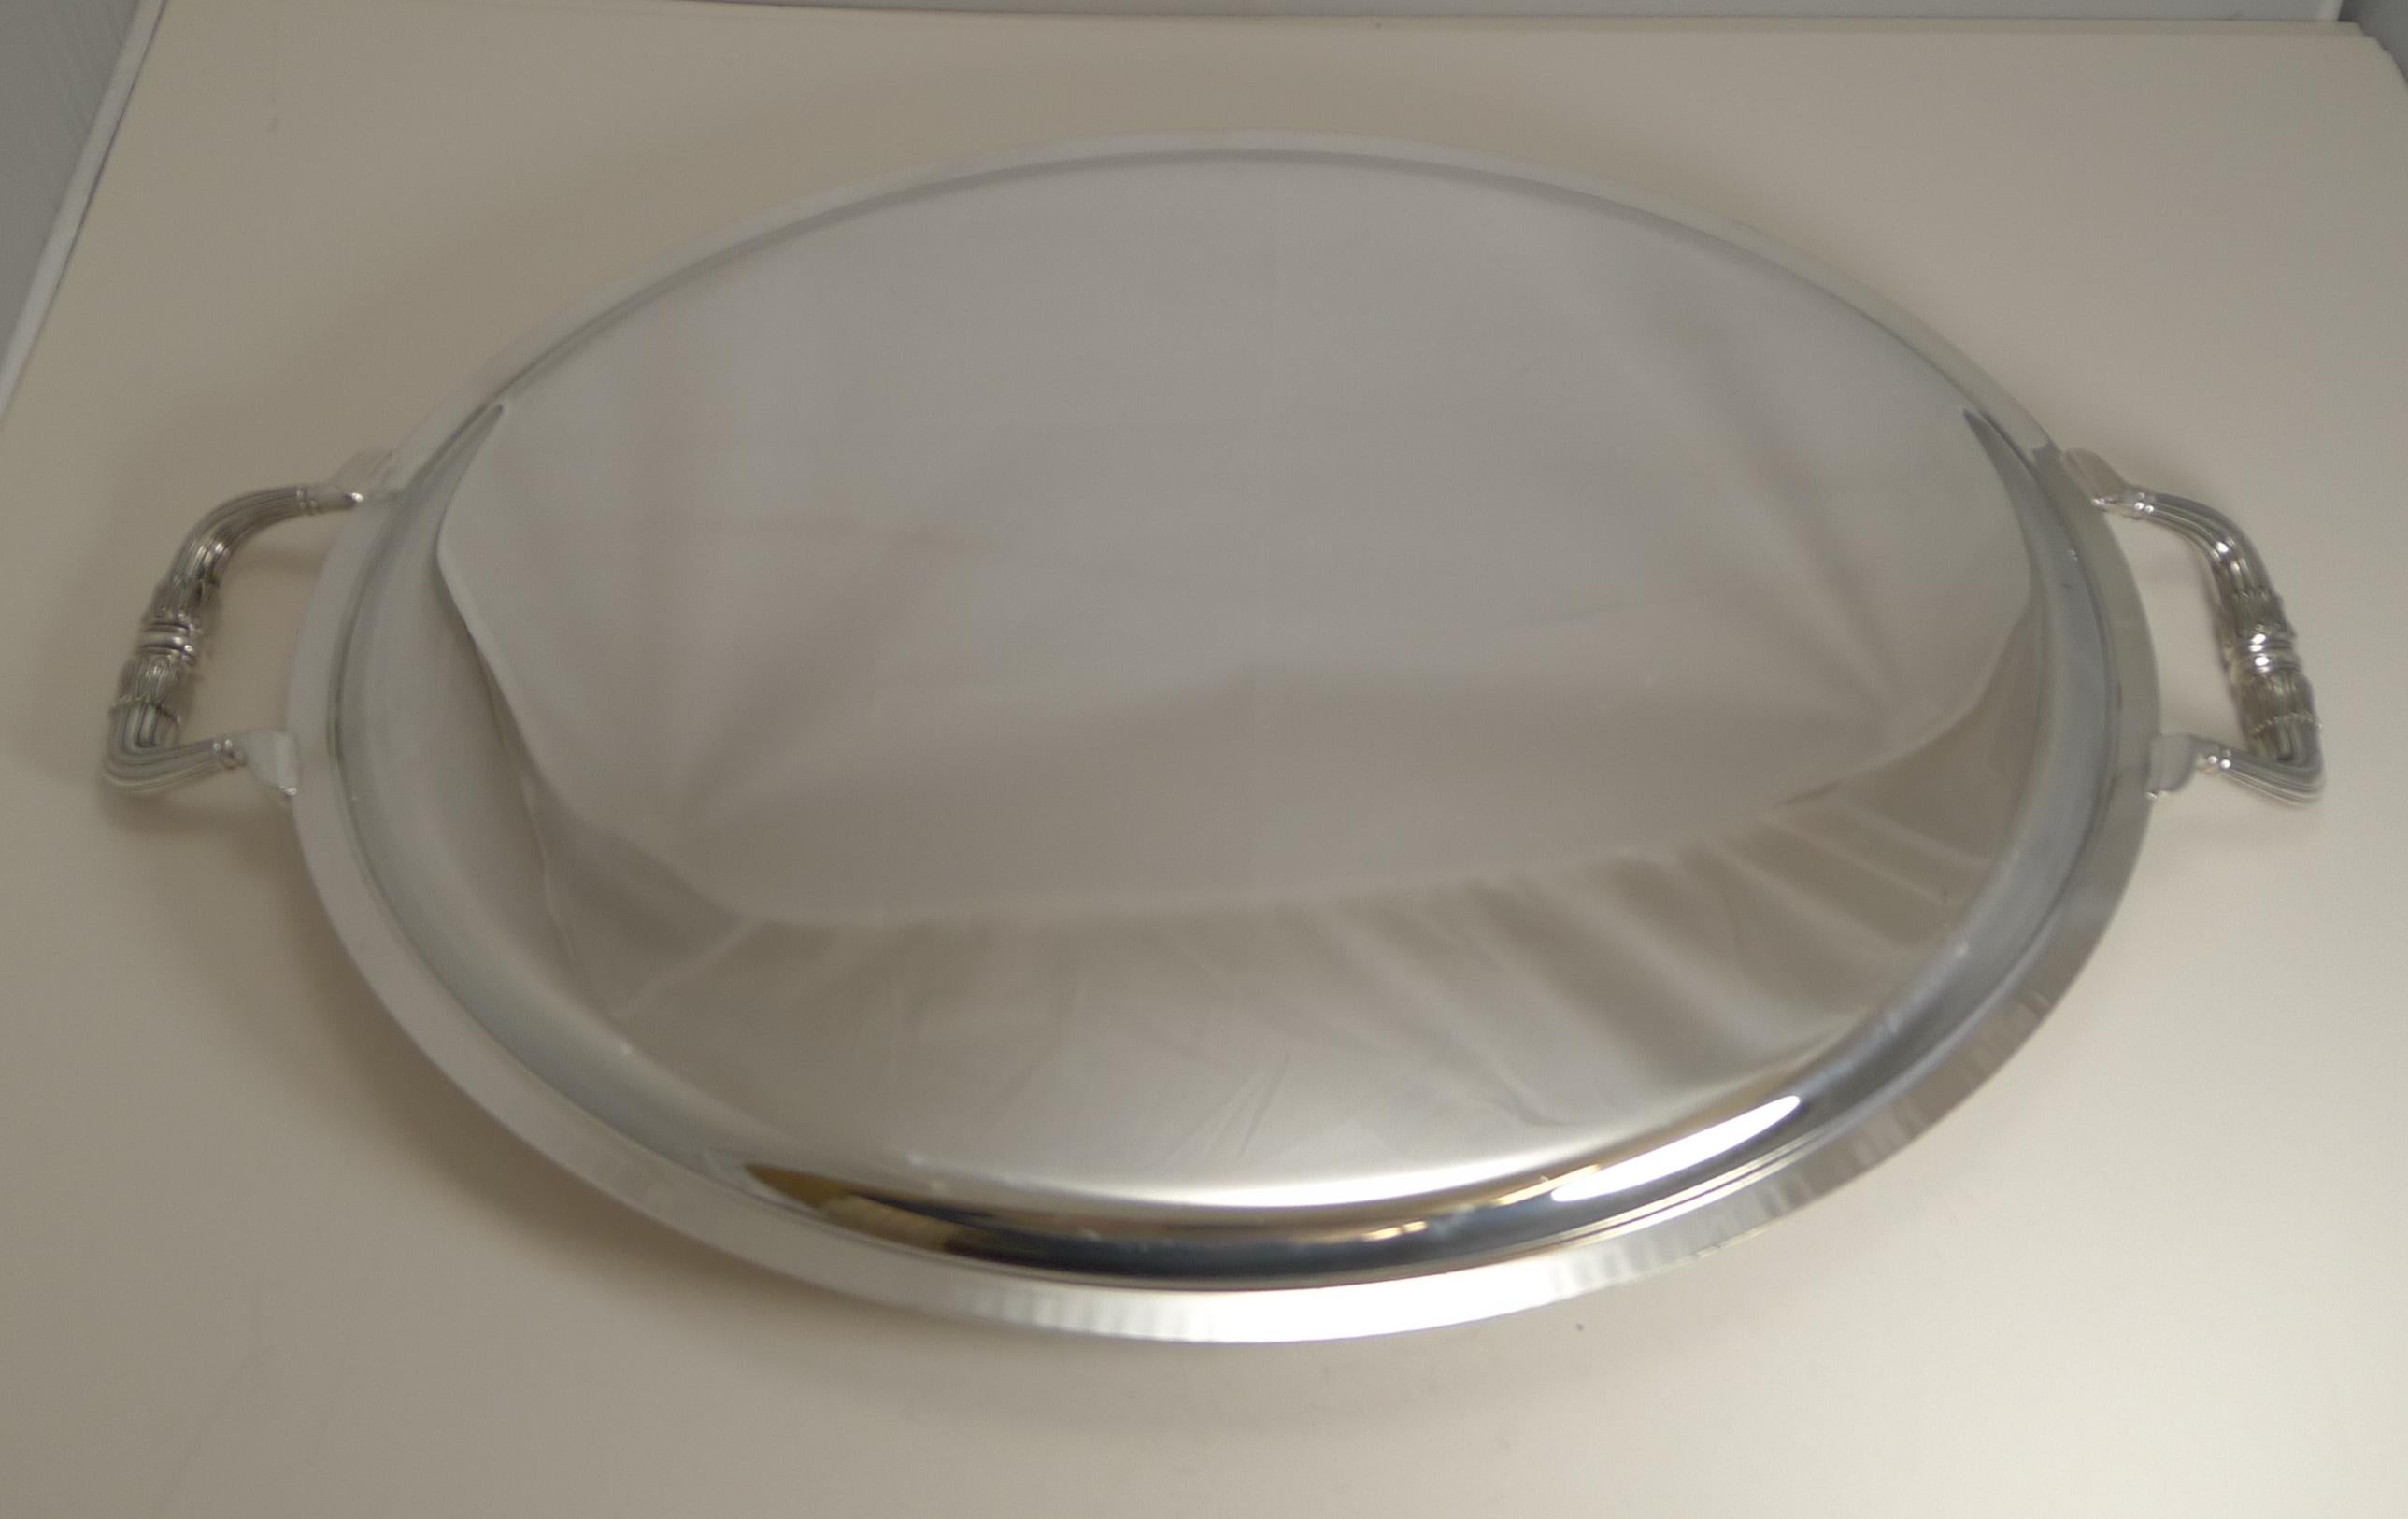 Late 20th Century Vintage Large Malmaison Serving Tray with Handles by Christofle, Paris